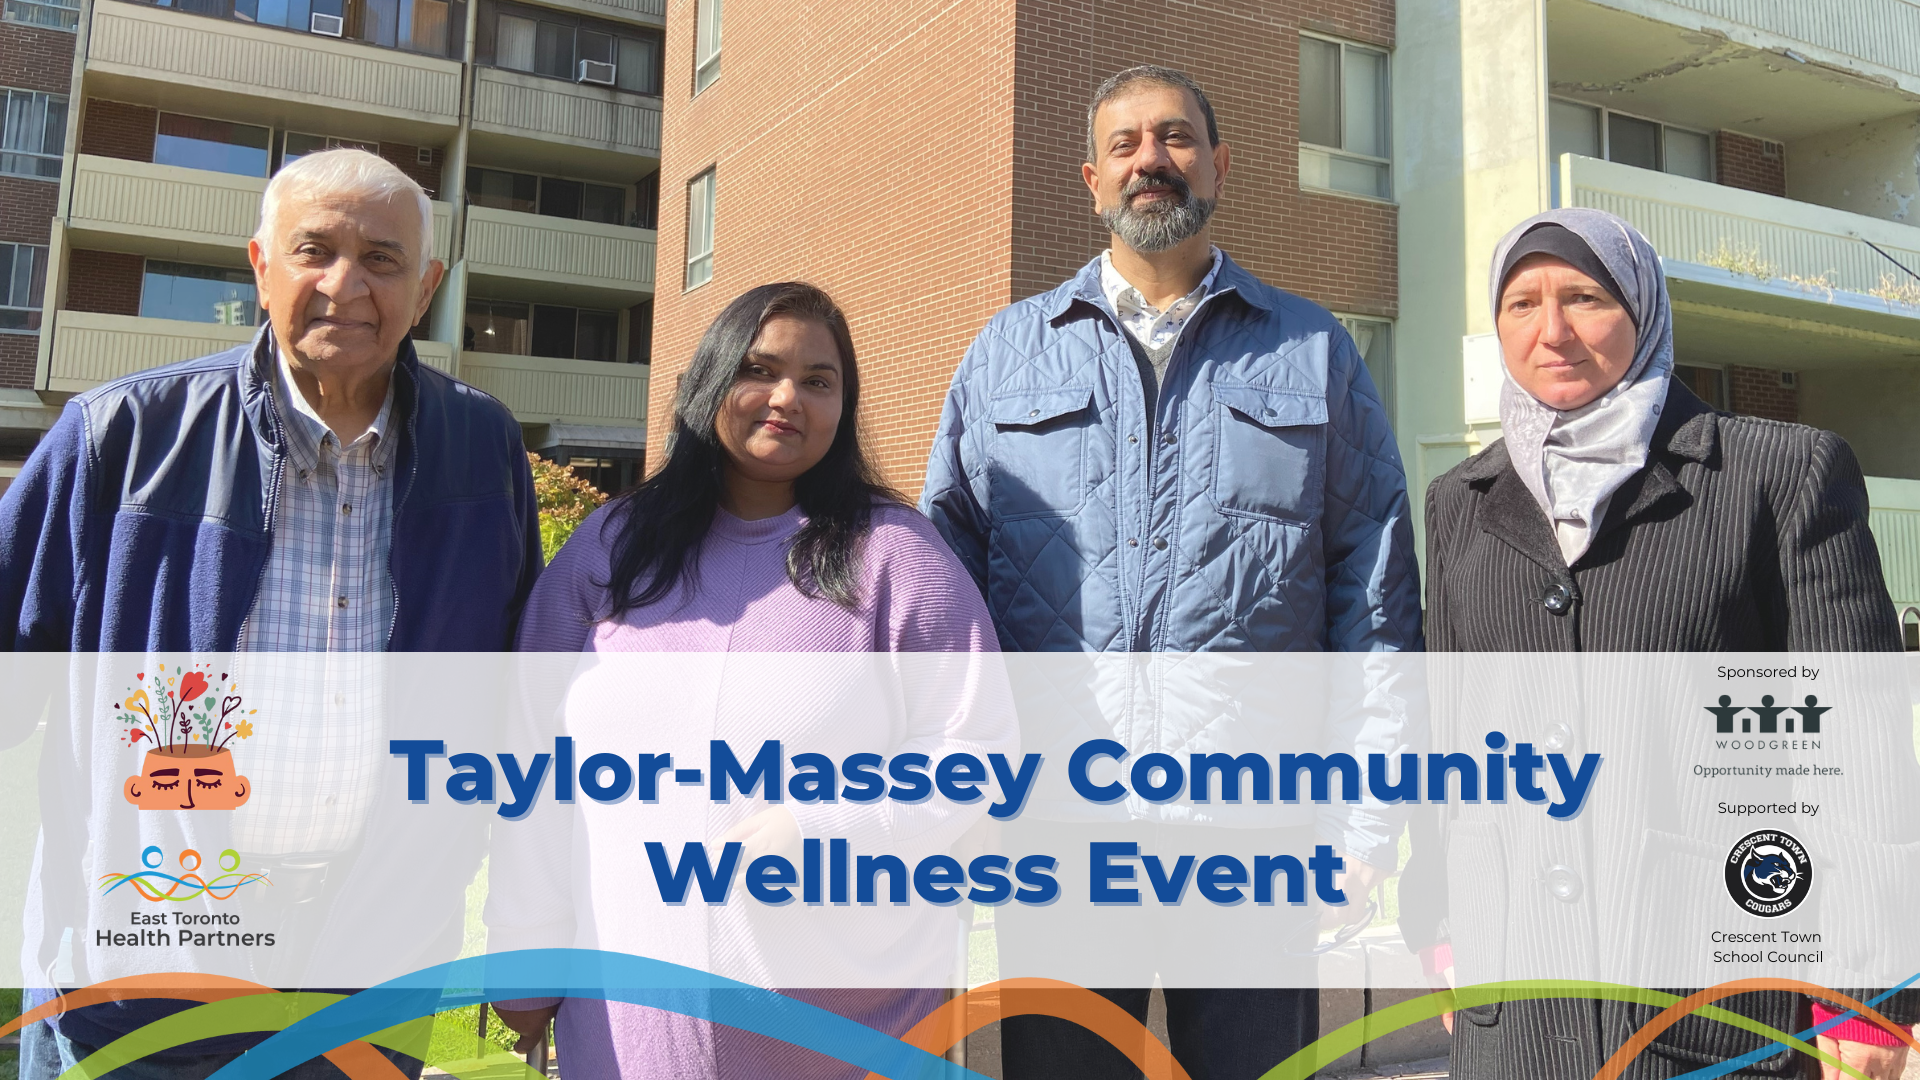 Featured image for “Join us on November 29 for the Taylor-Massey Community Wellness Event in Crescent Town”